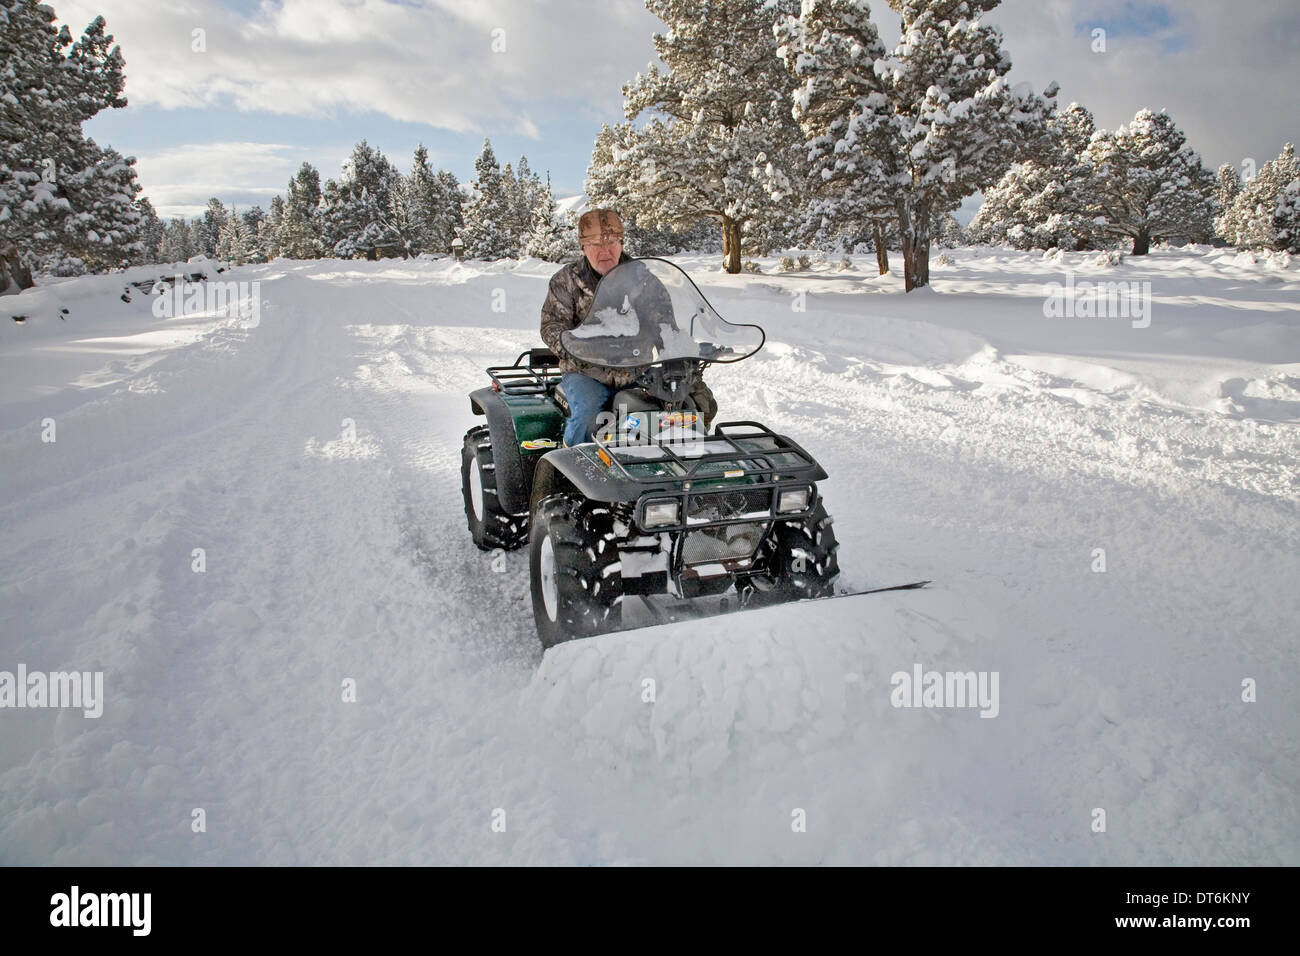 A senior citizen plows snow with an ATV, all terrain vehicle, after a major snow storm in central Oregon. Stock Photo